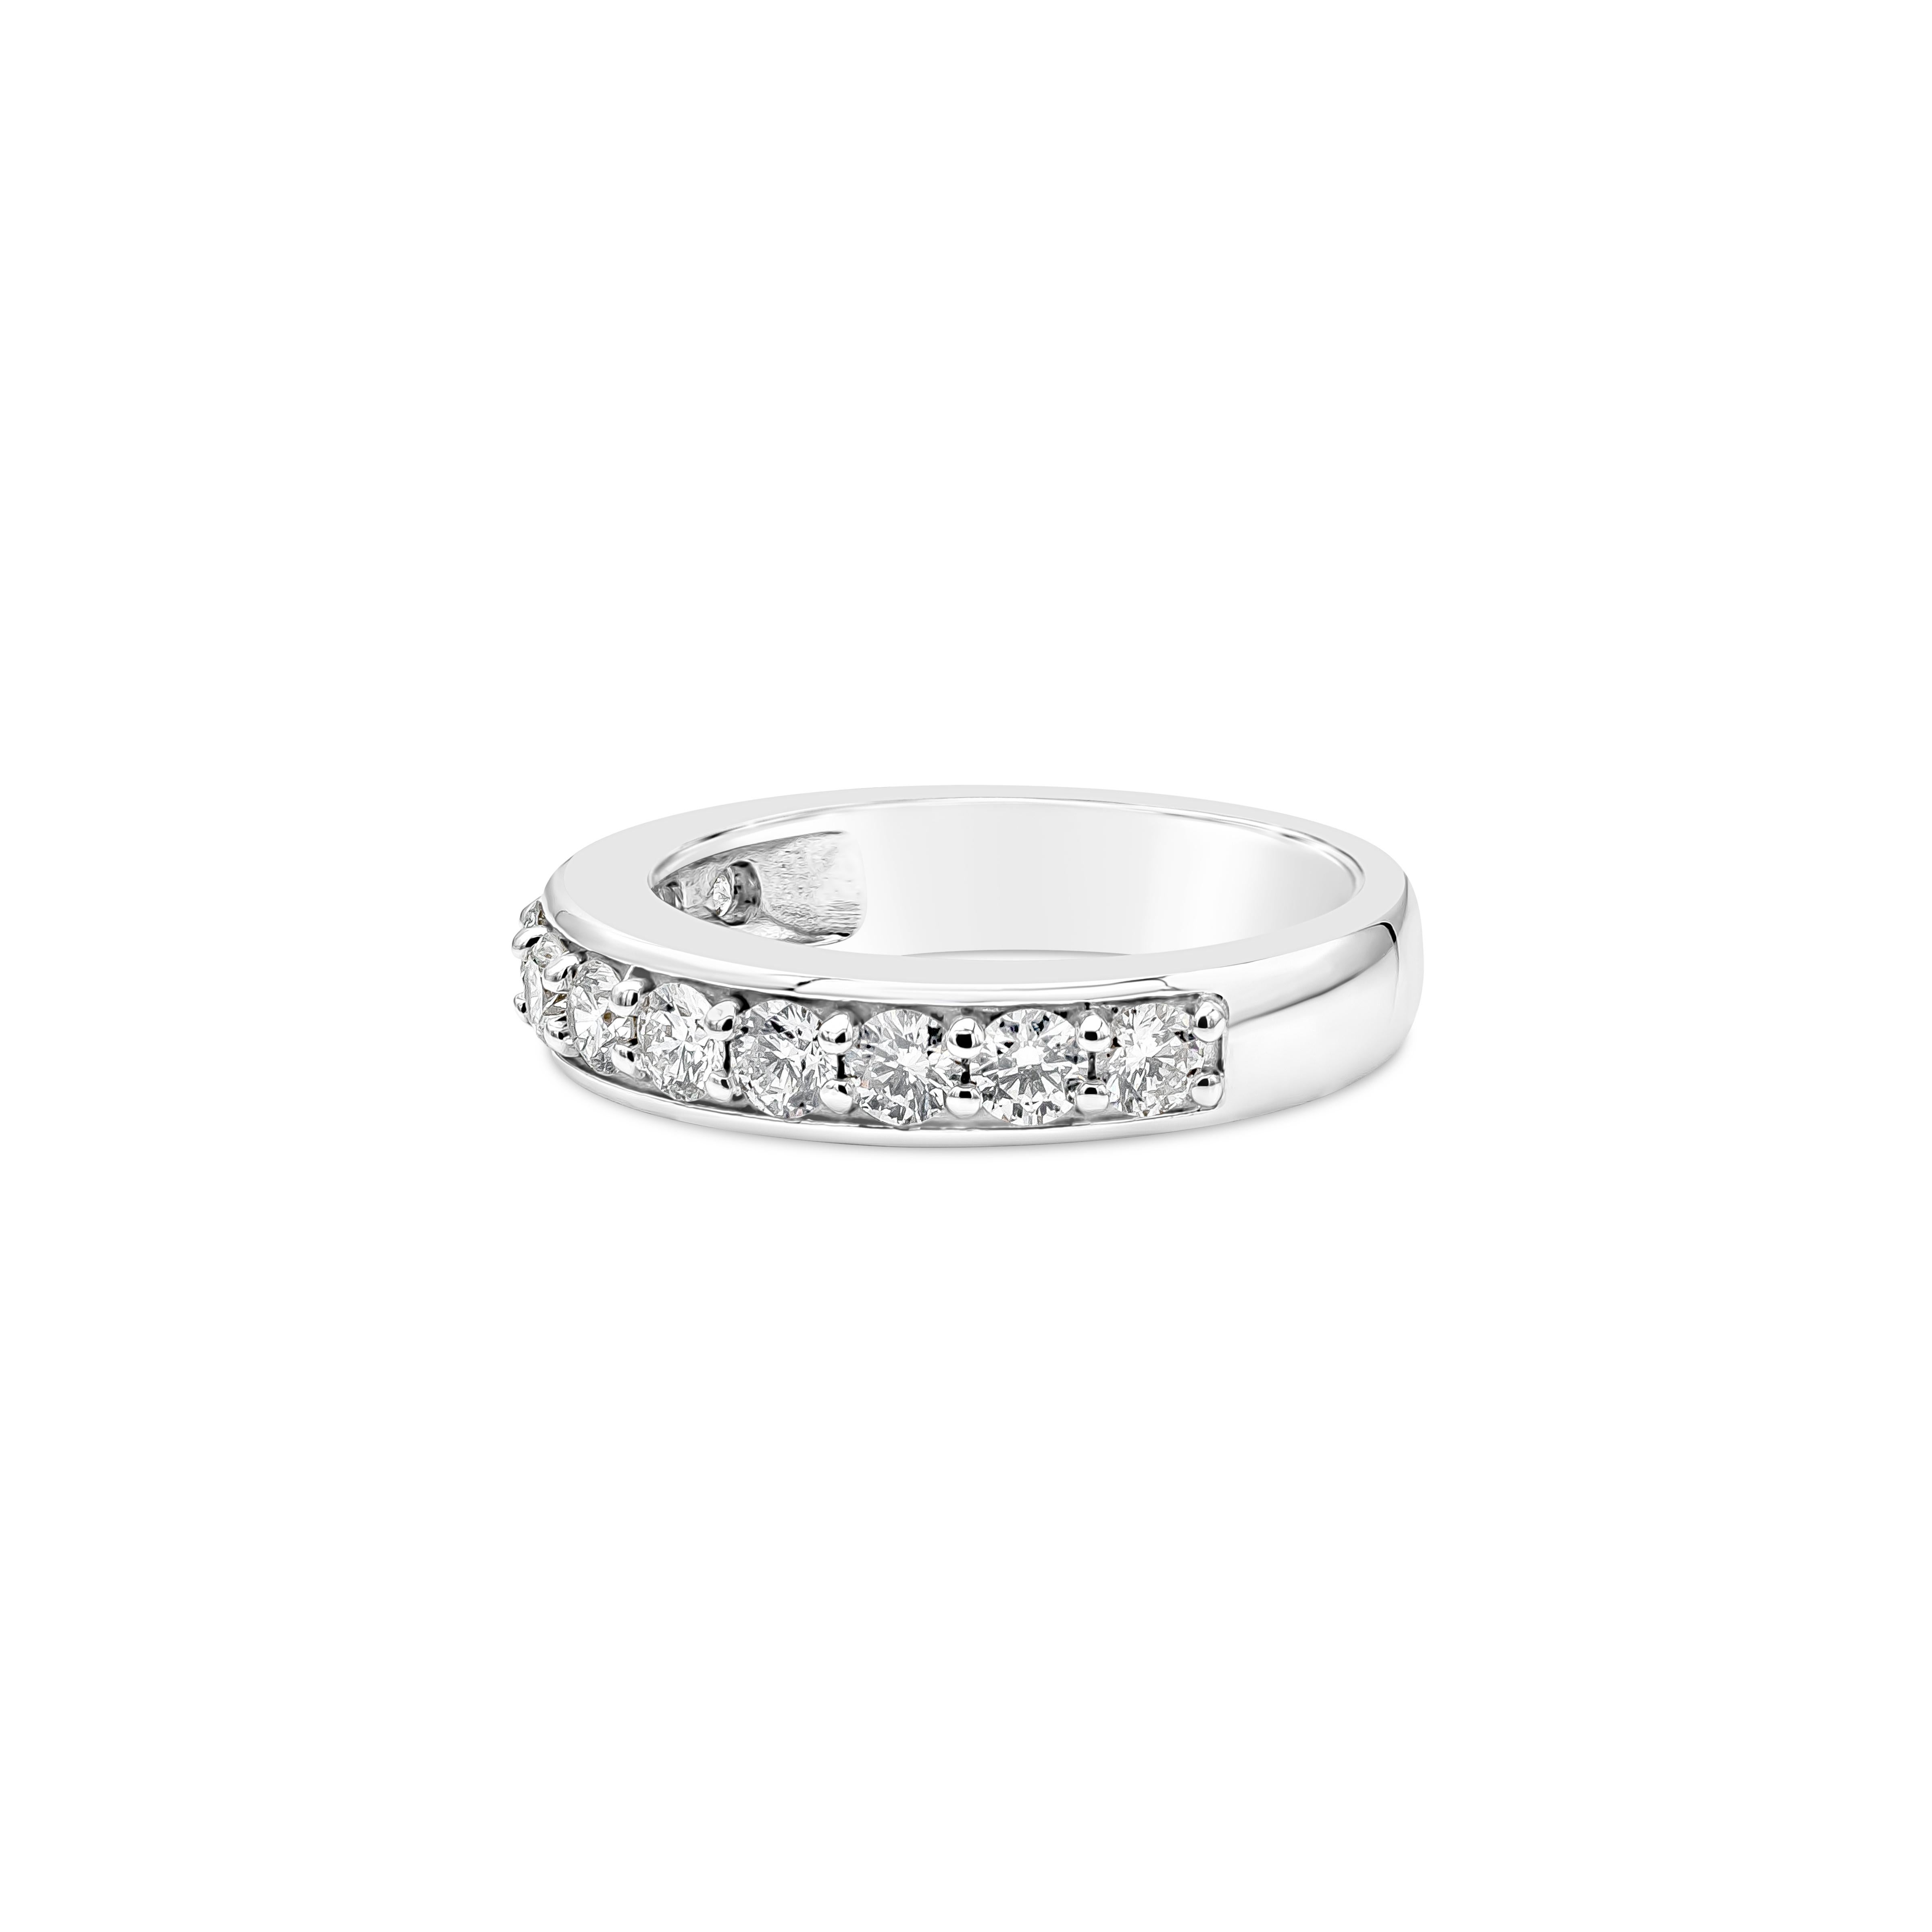 A fascinating half eternity wedding band features brilliant round diamonds weighing 0.92 carats total. Set in a shared two prong composition. Made in 14K White Gold, Size 6.75 US

Style available in different price ranges. Prices are based on your